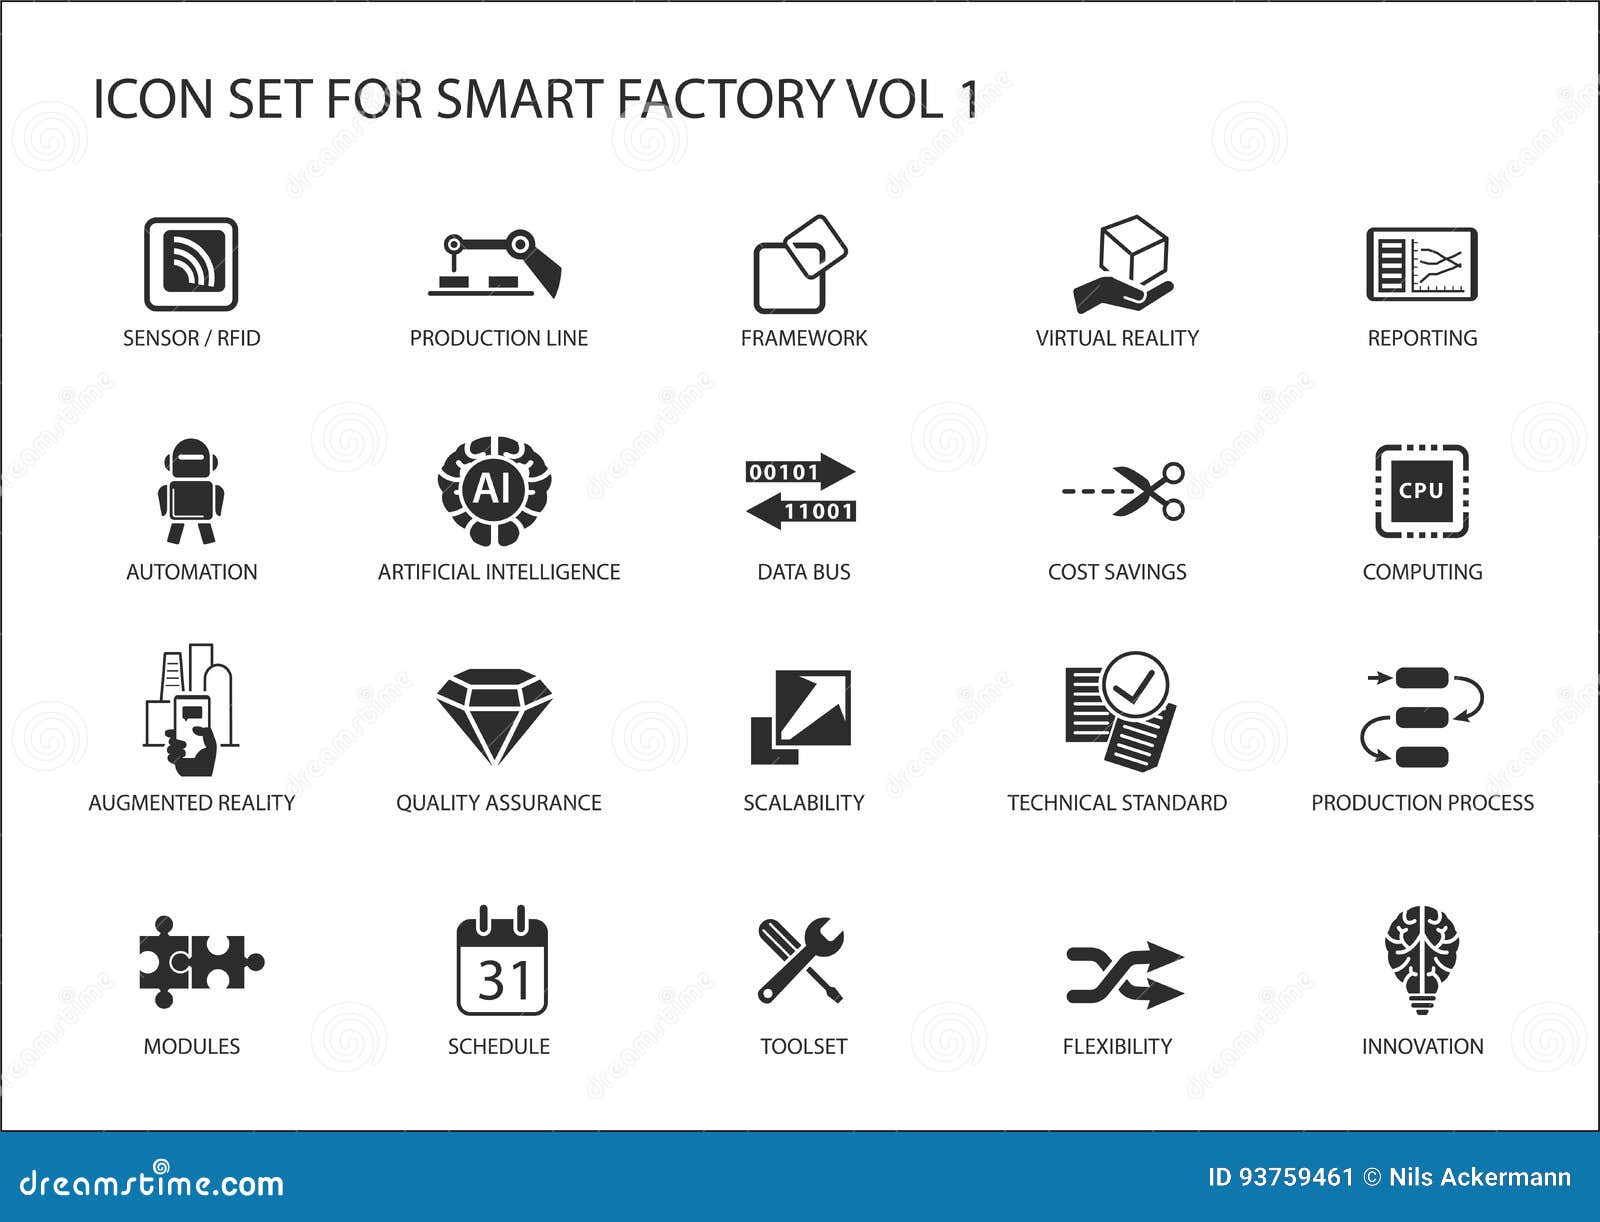 smart factory icons like sensor, rfid, production process, automation, augmented reality